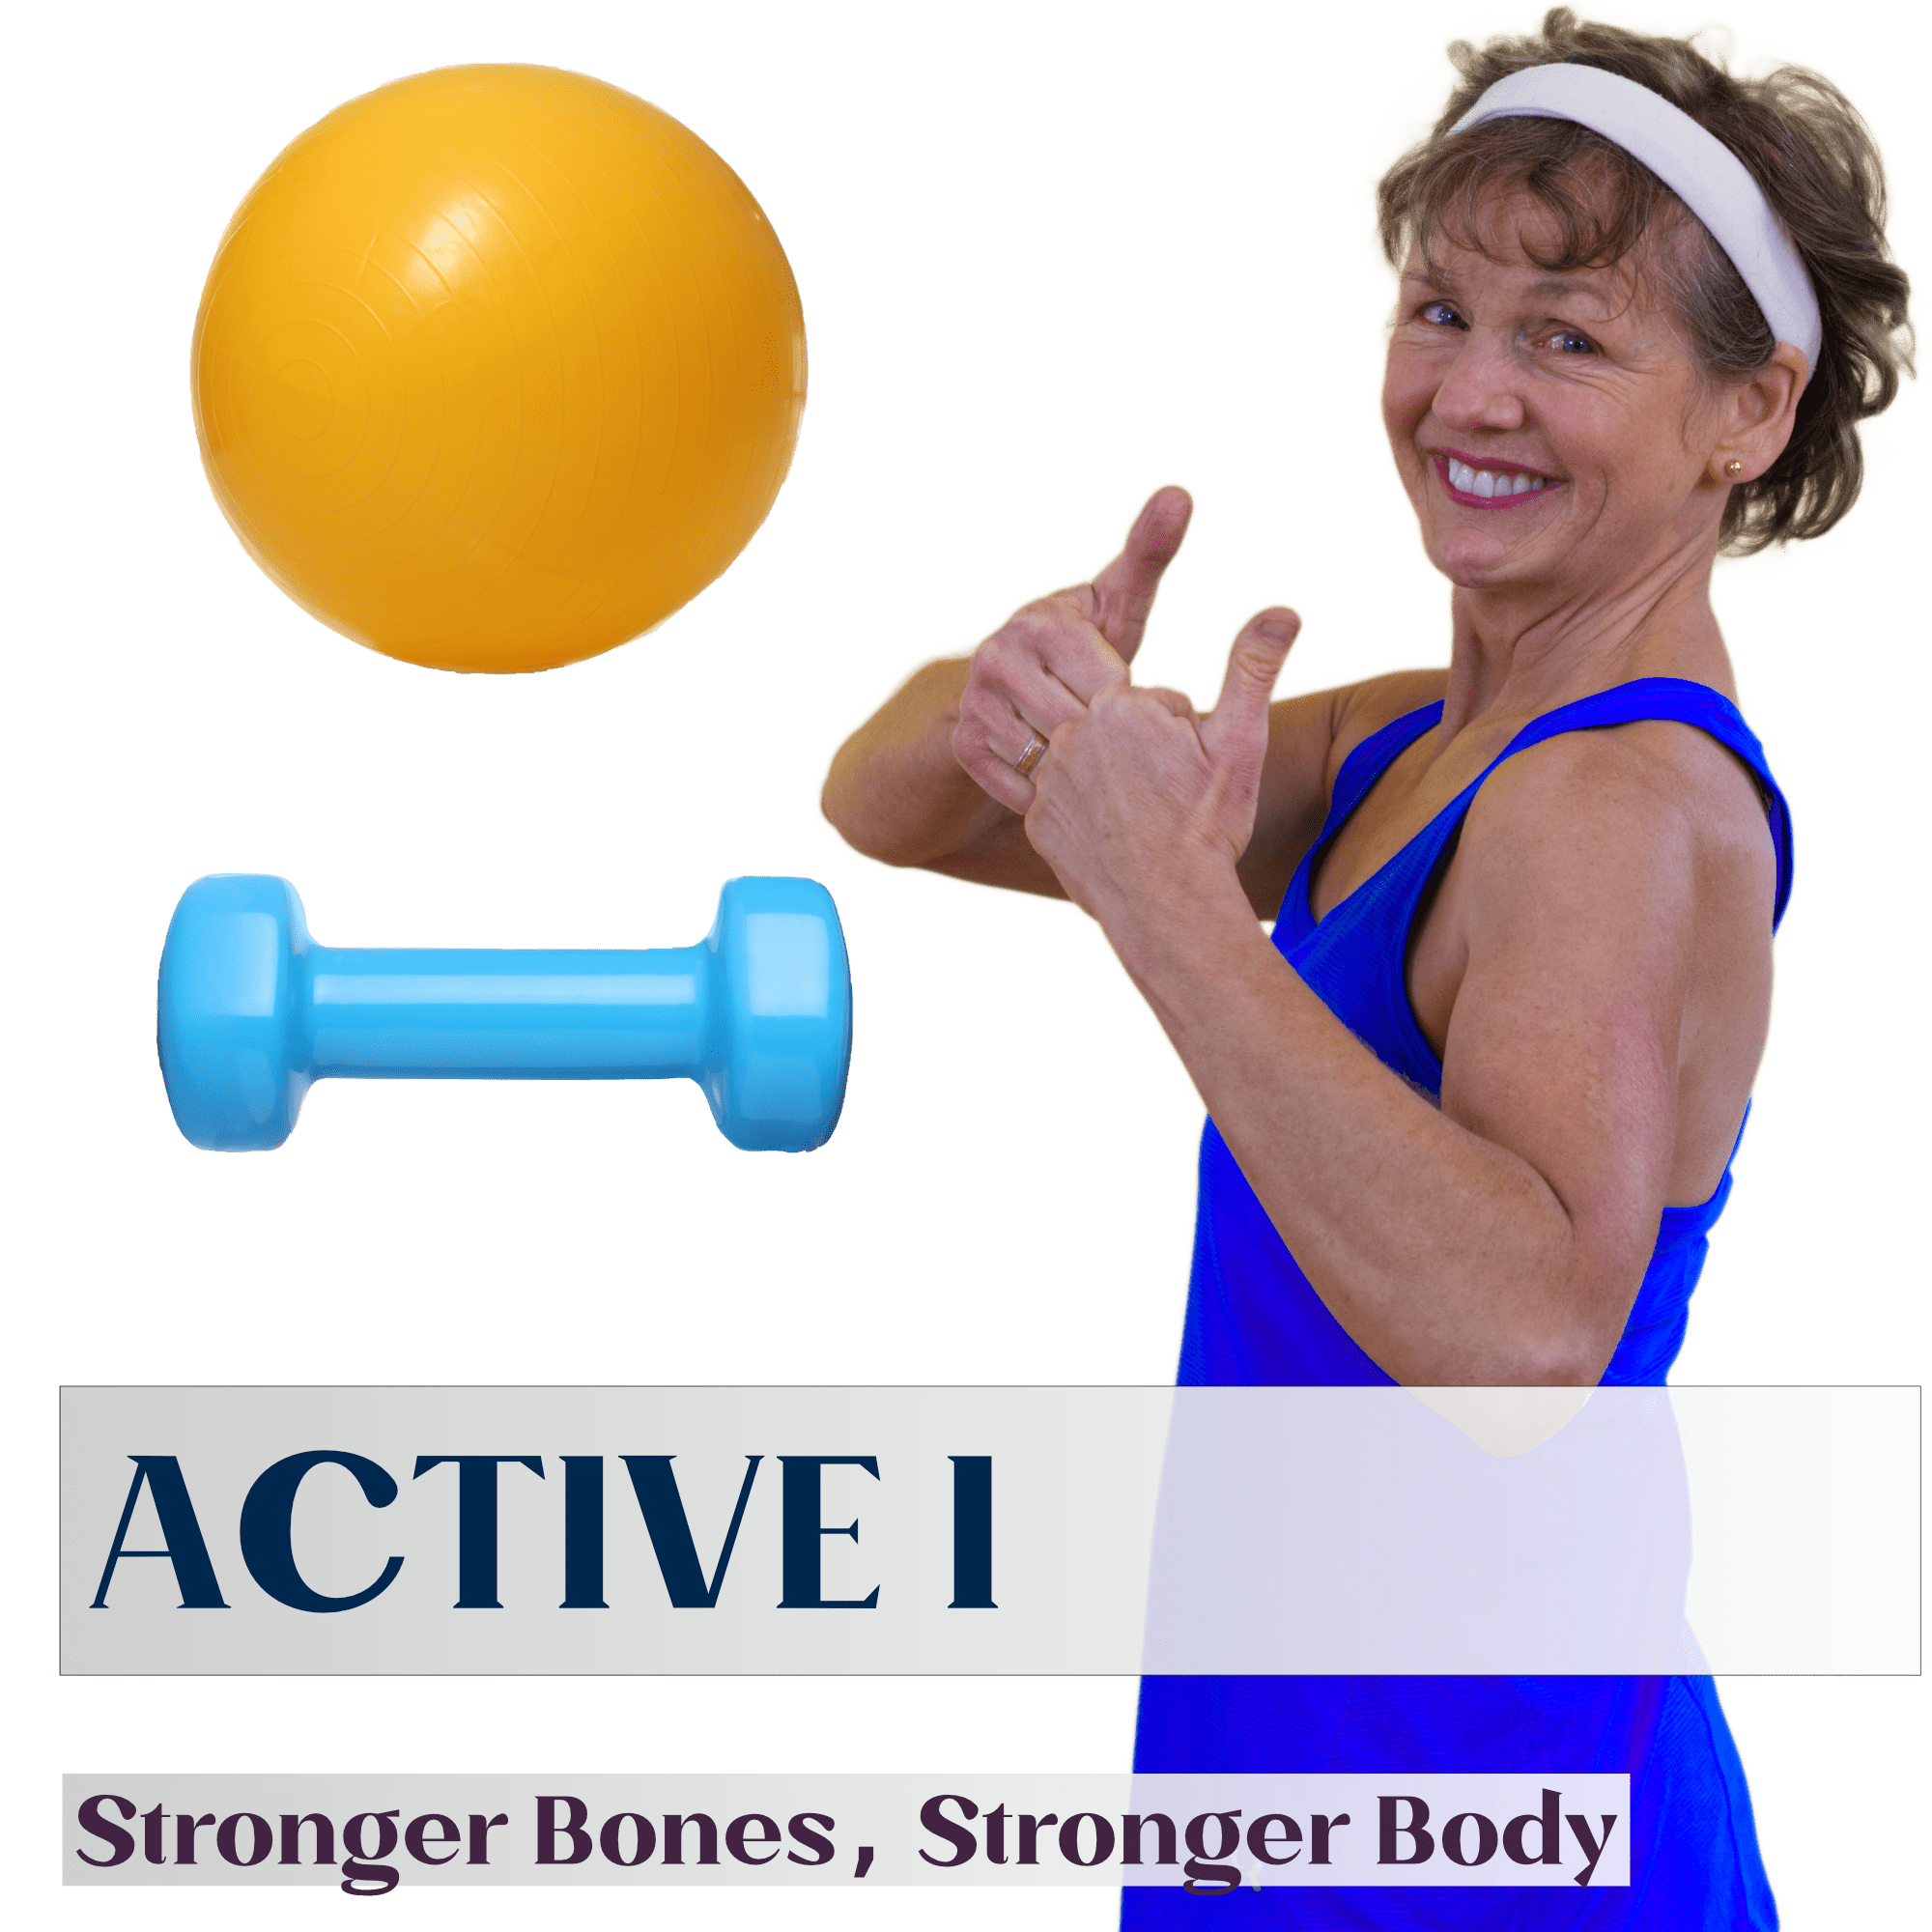 osteoporosis exercise equipment for active I video